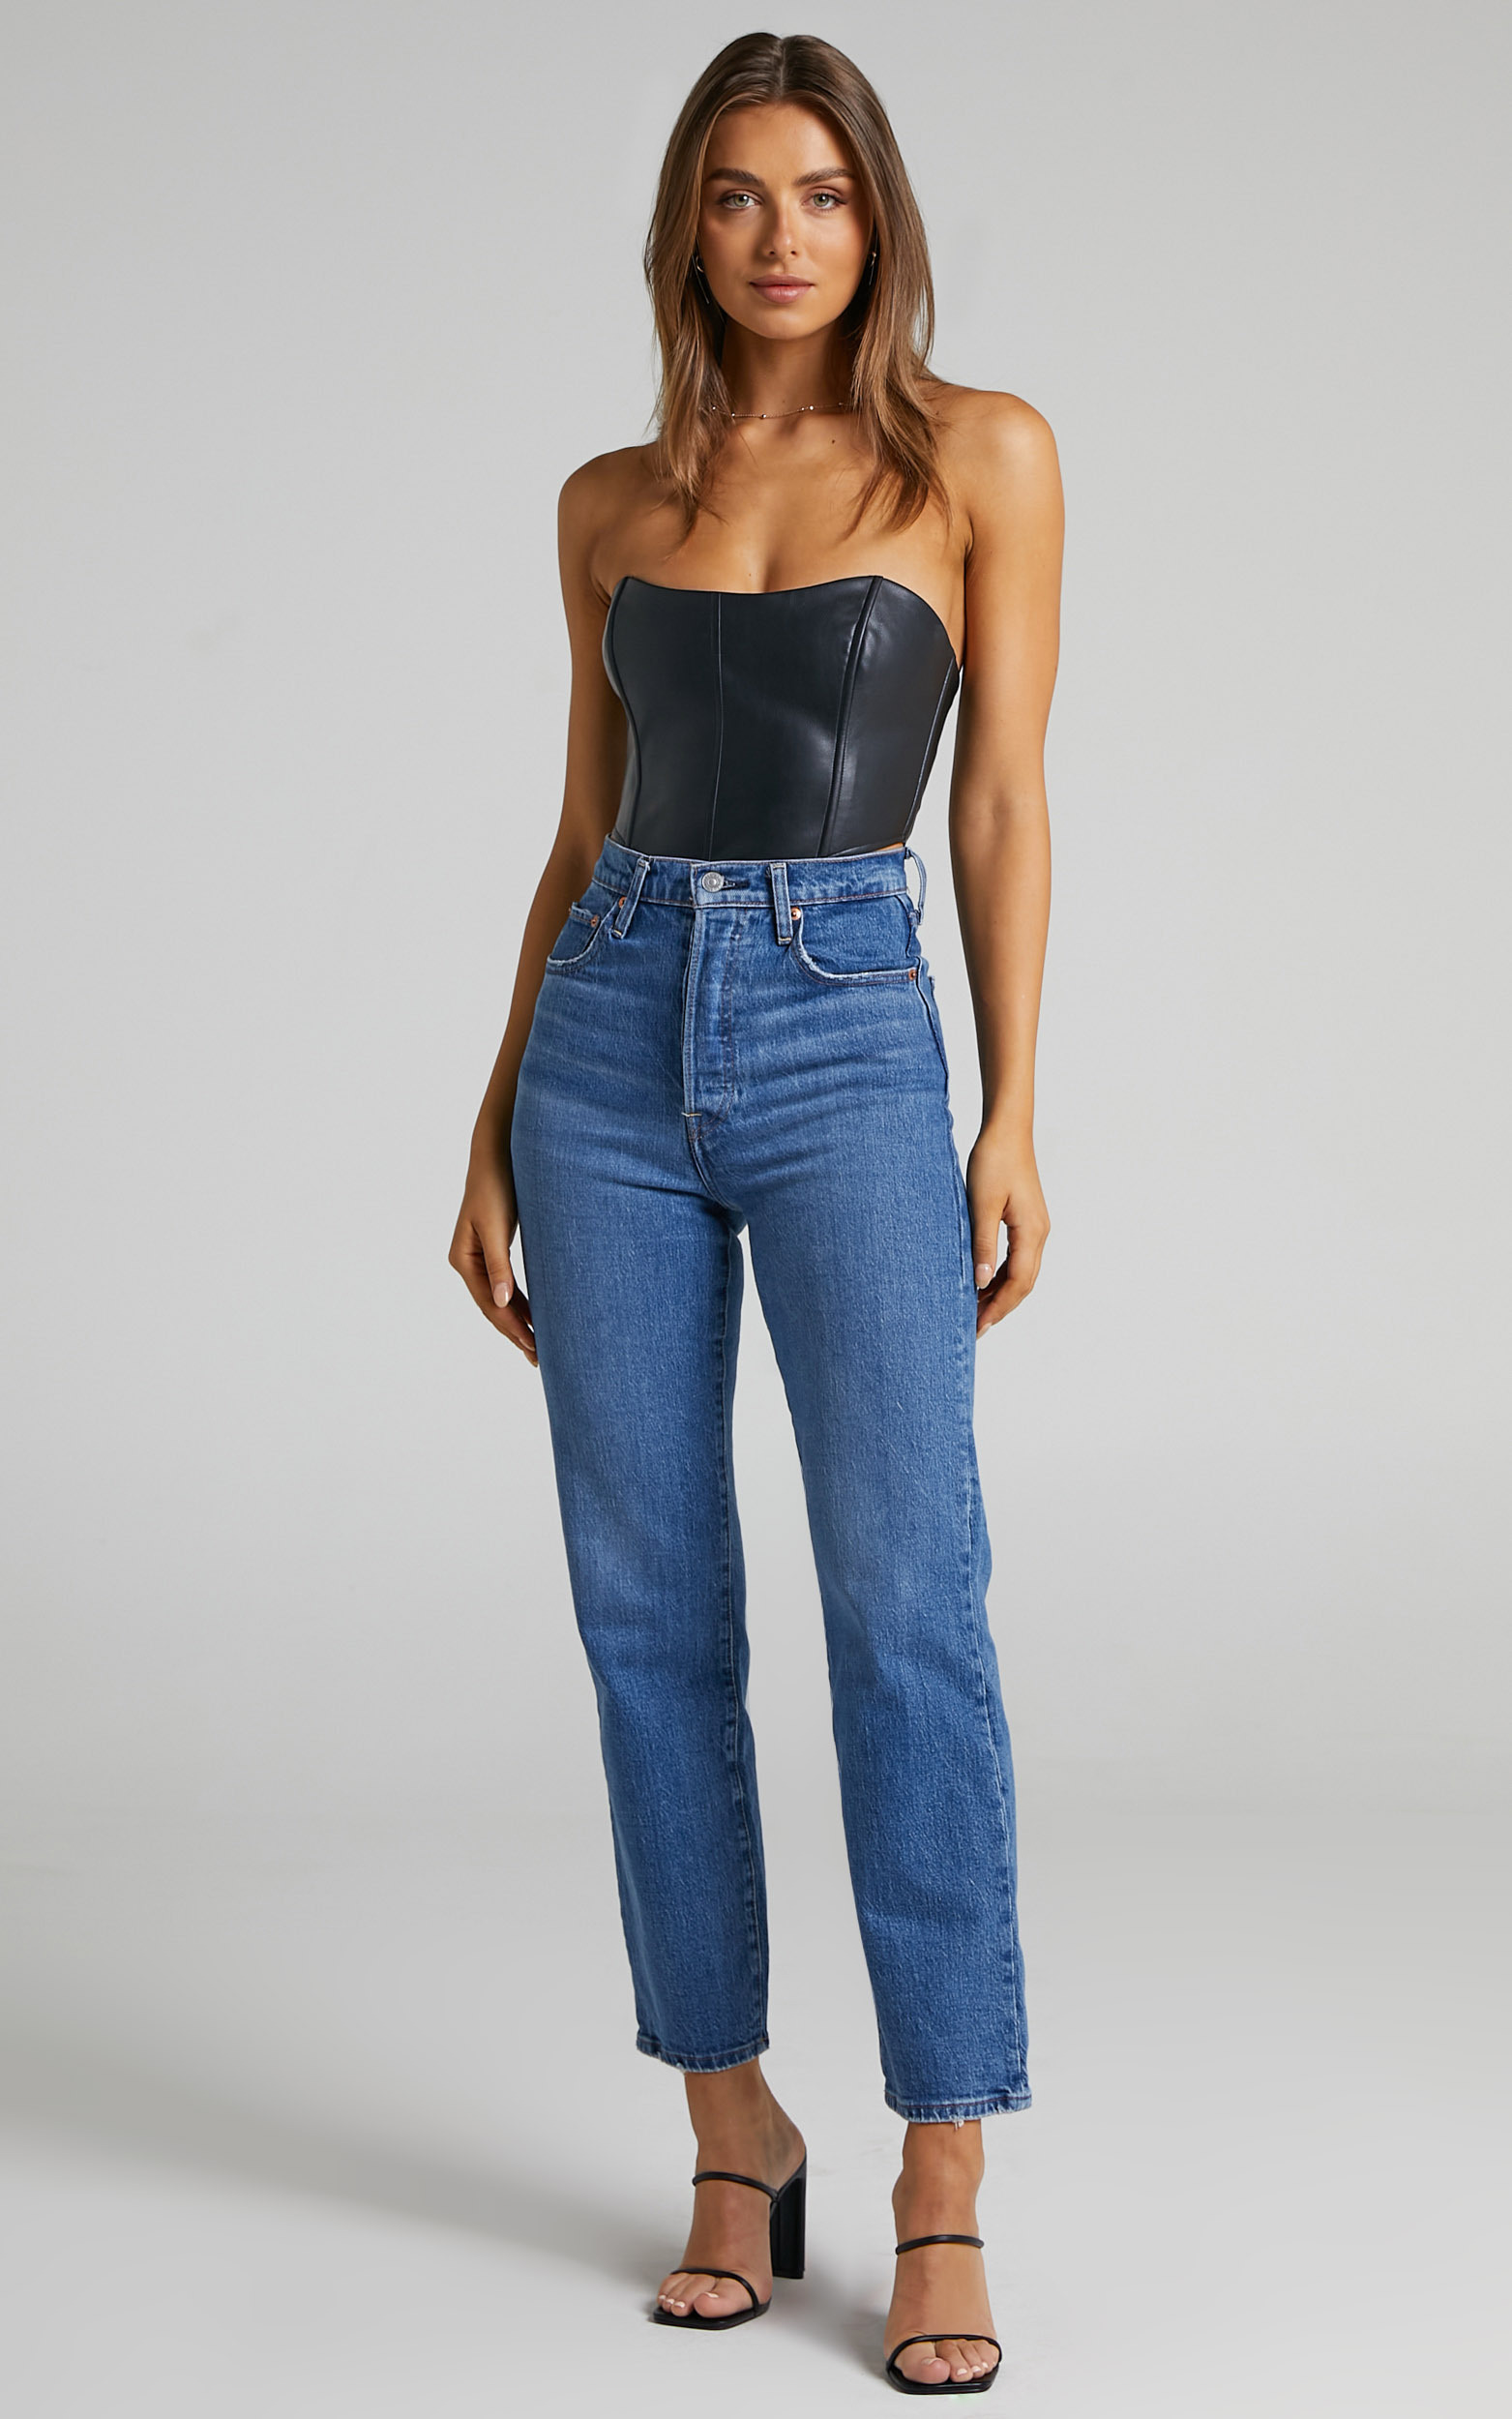 matras Opeenvolgend Mellow Levi's - High Waisted Ribcage Straight Ankle Jeans in Jazz Jive Together |  Showpo USA